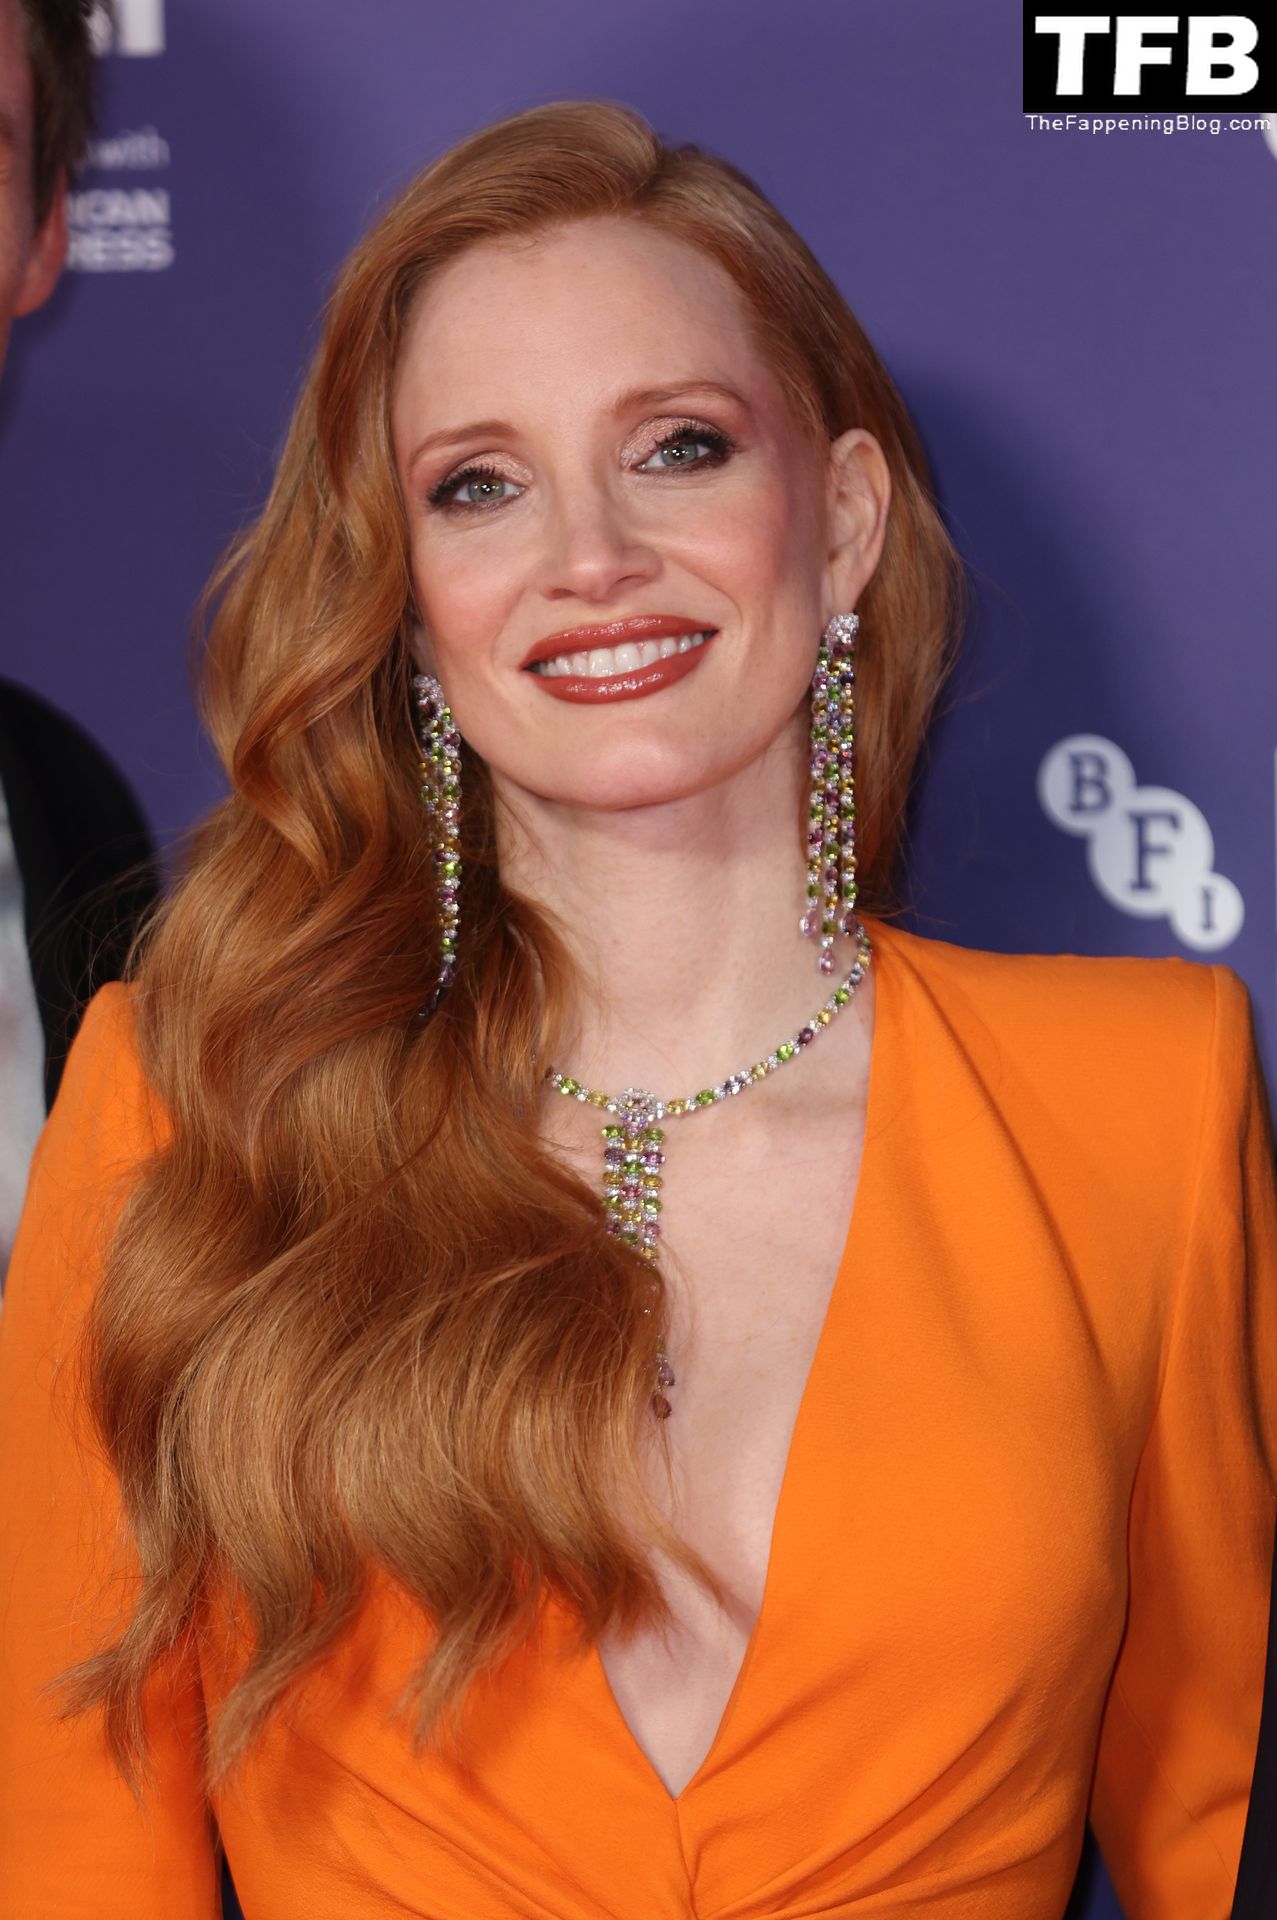 Jessica-Chastain-Sexy-The-Fappening-Blog-2.jpg